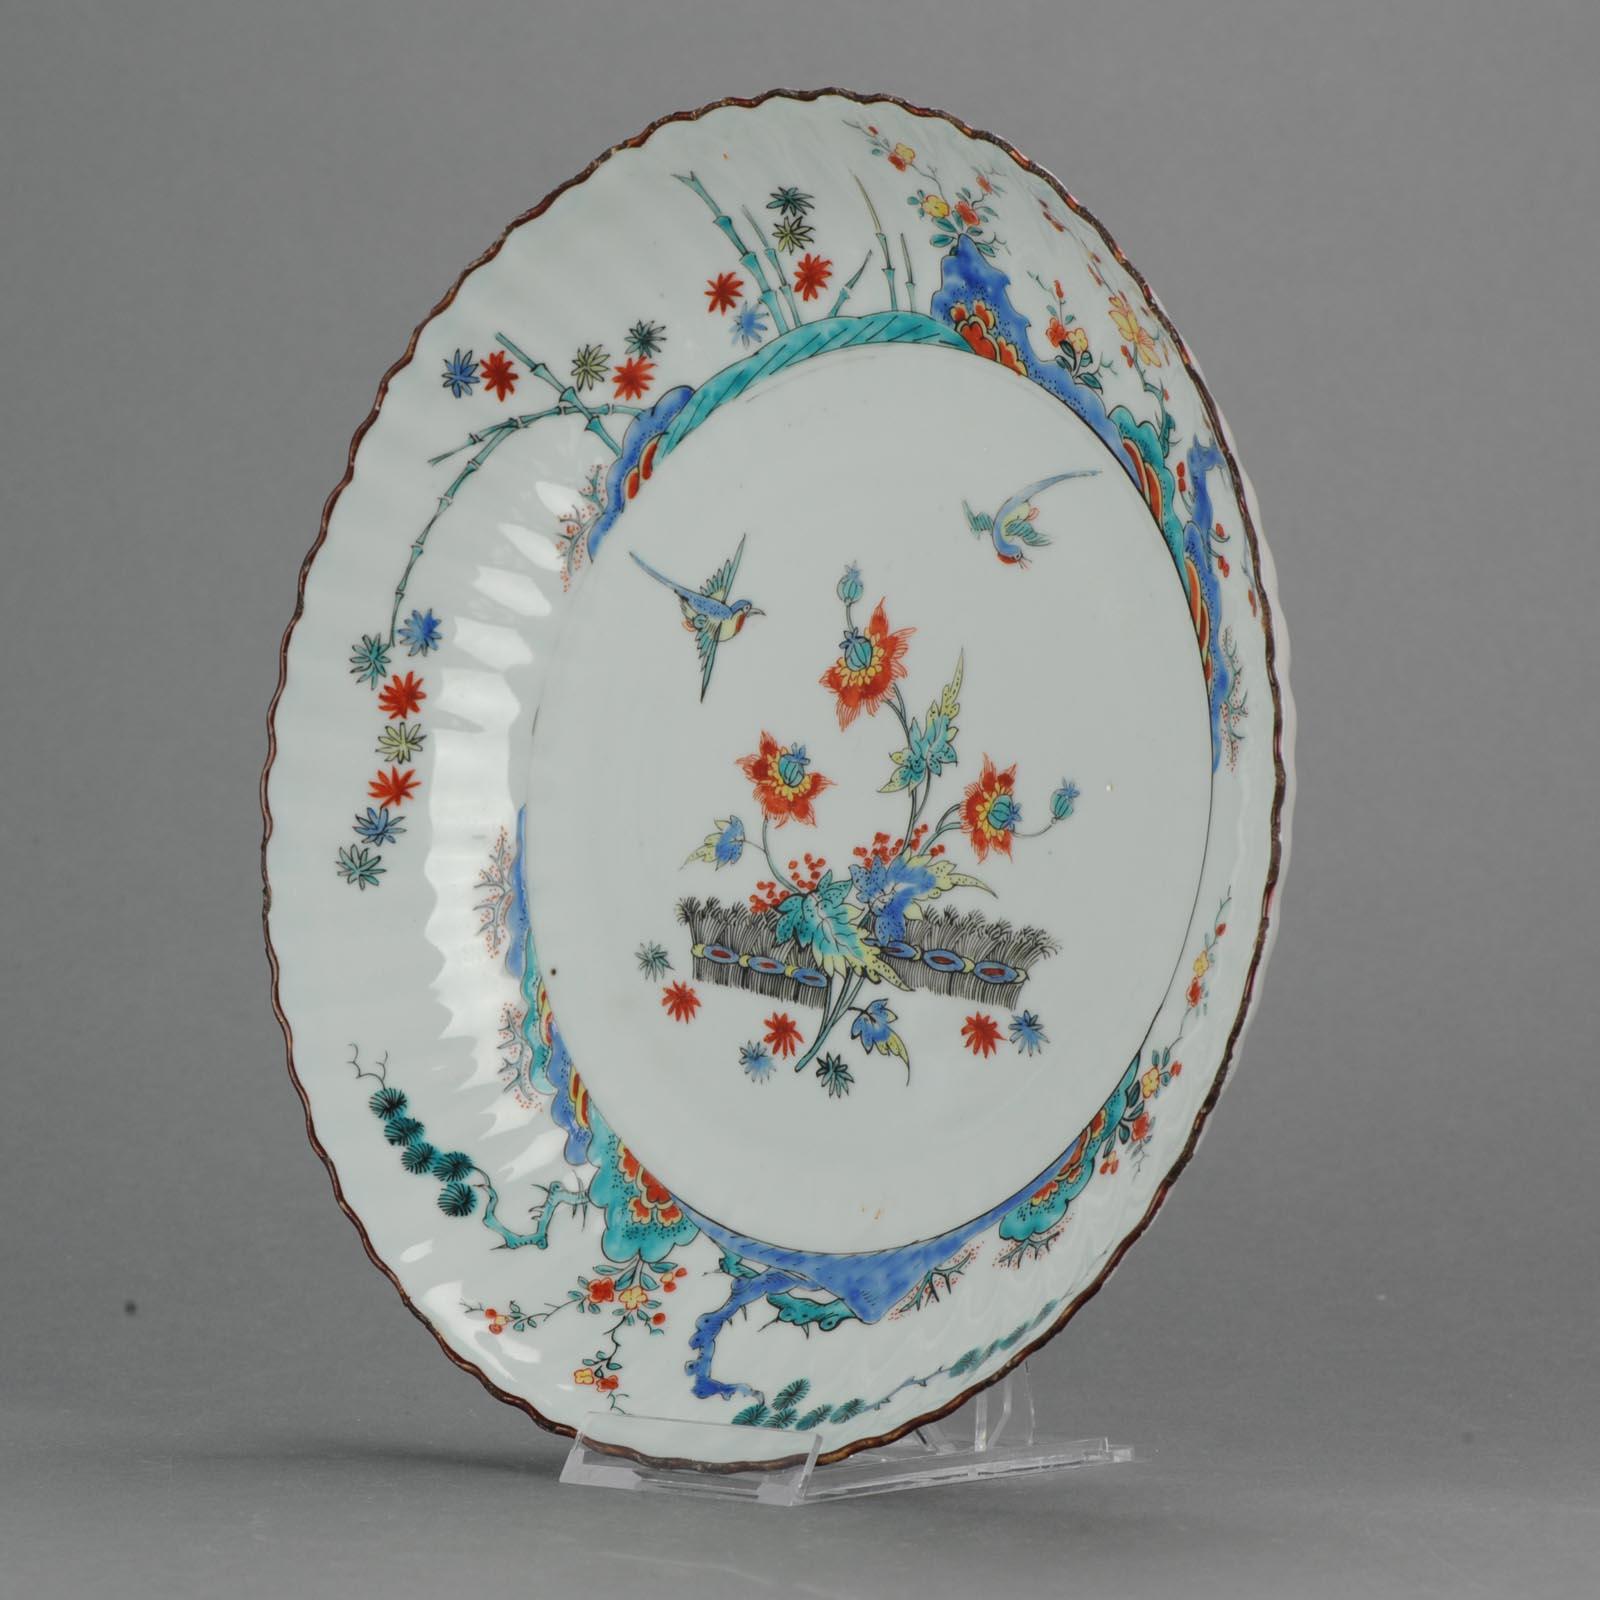 Stunning piece. Decorated in Holland 1720-1730 in Kakiemon style with a border of the' Three Friends' surrounding exotic flowers and banded hedges.

The scene and quality of painting is amazing.

Reference:
Helen Espir, European decoration on